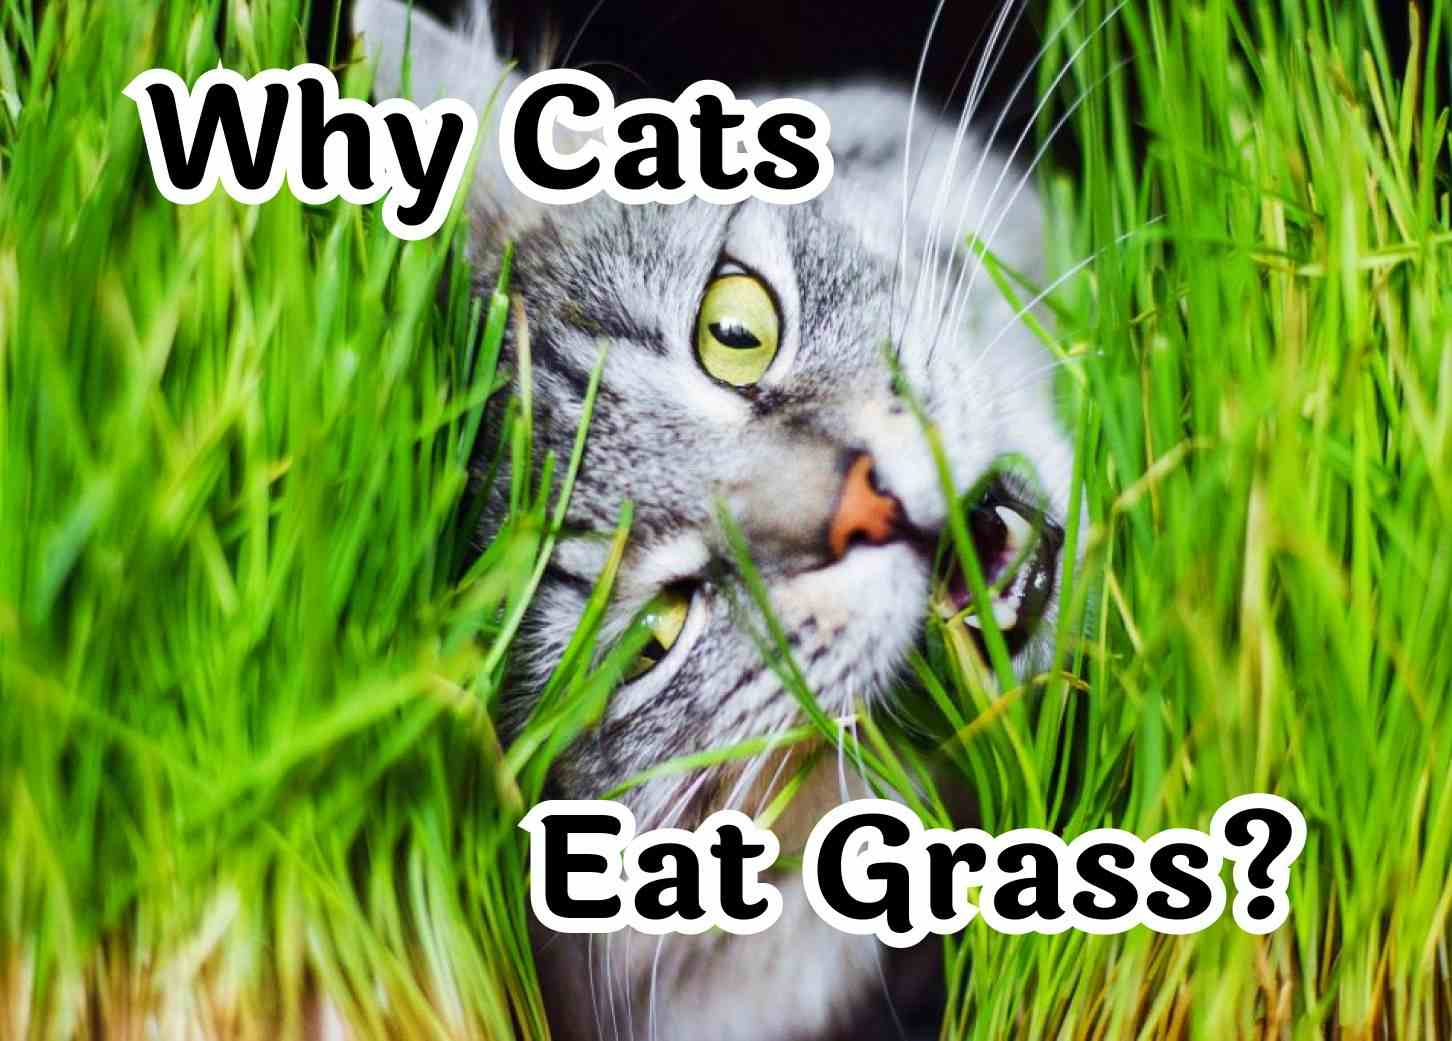 Reasons why cats consume grass